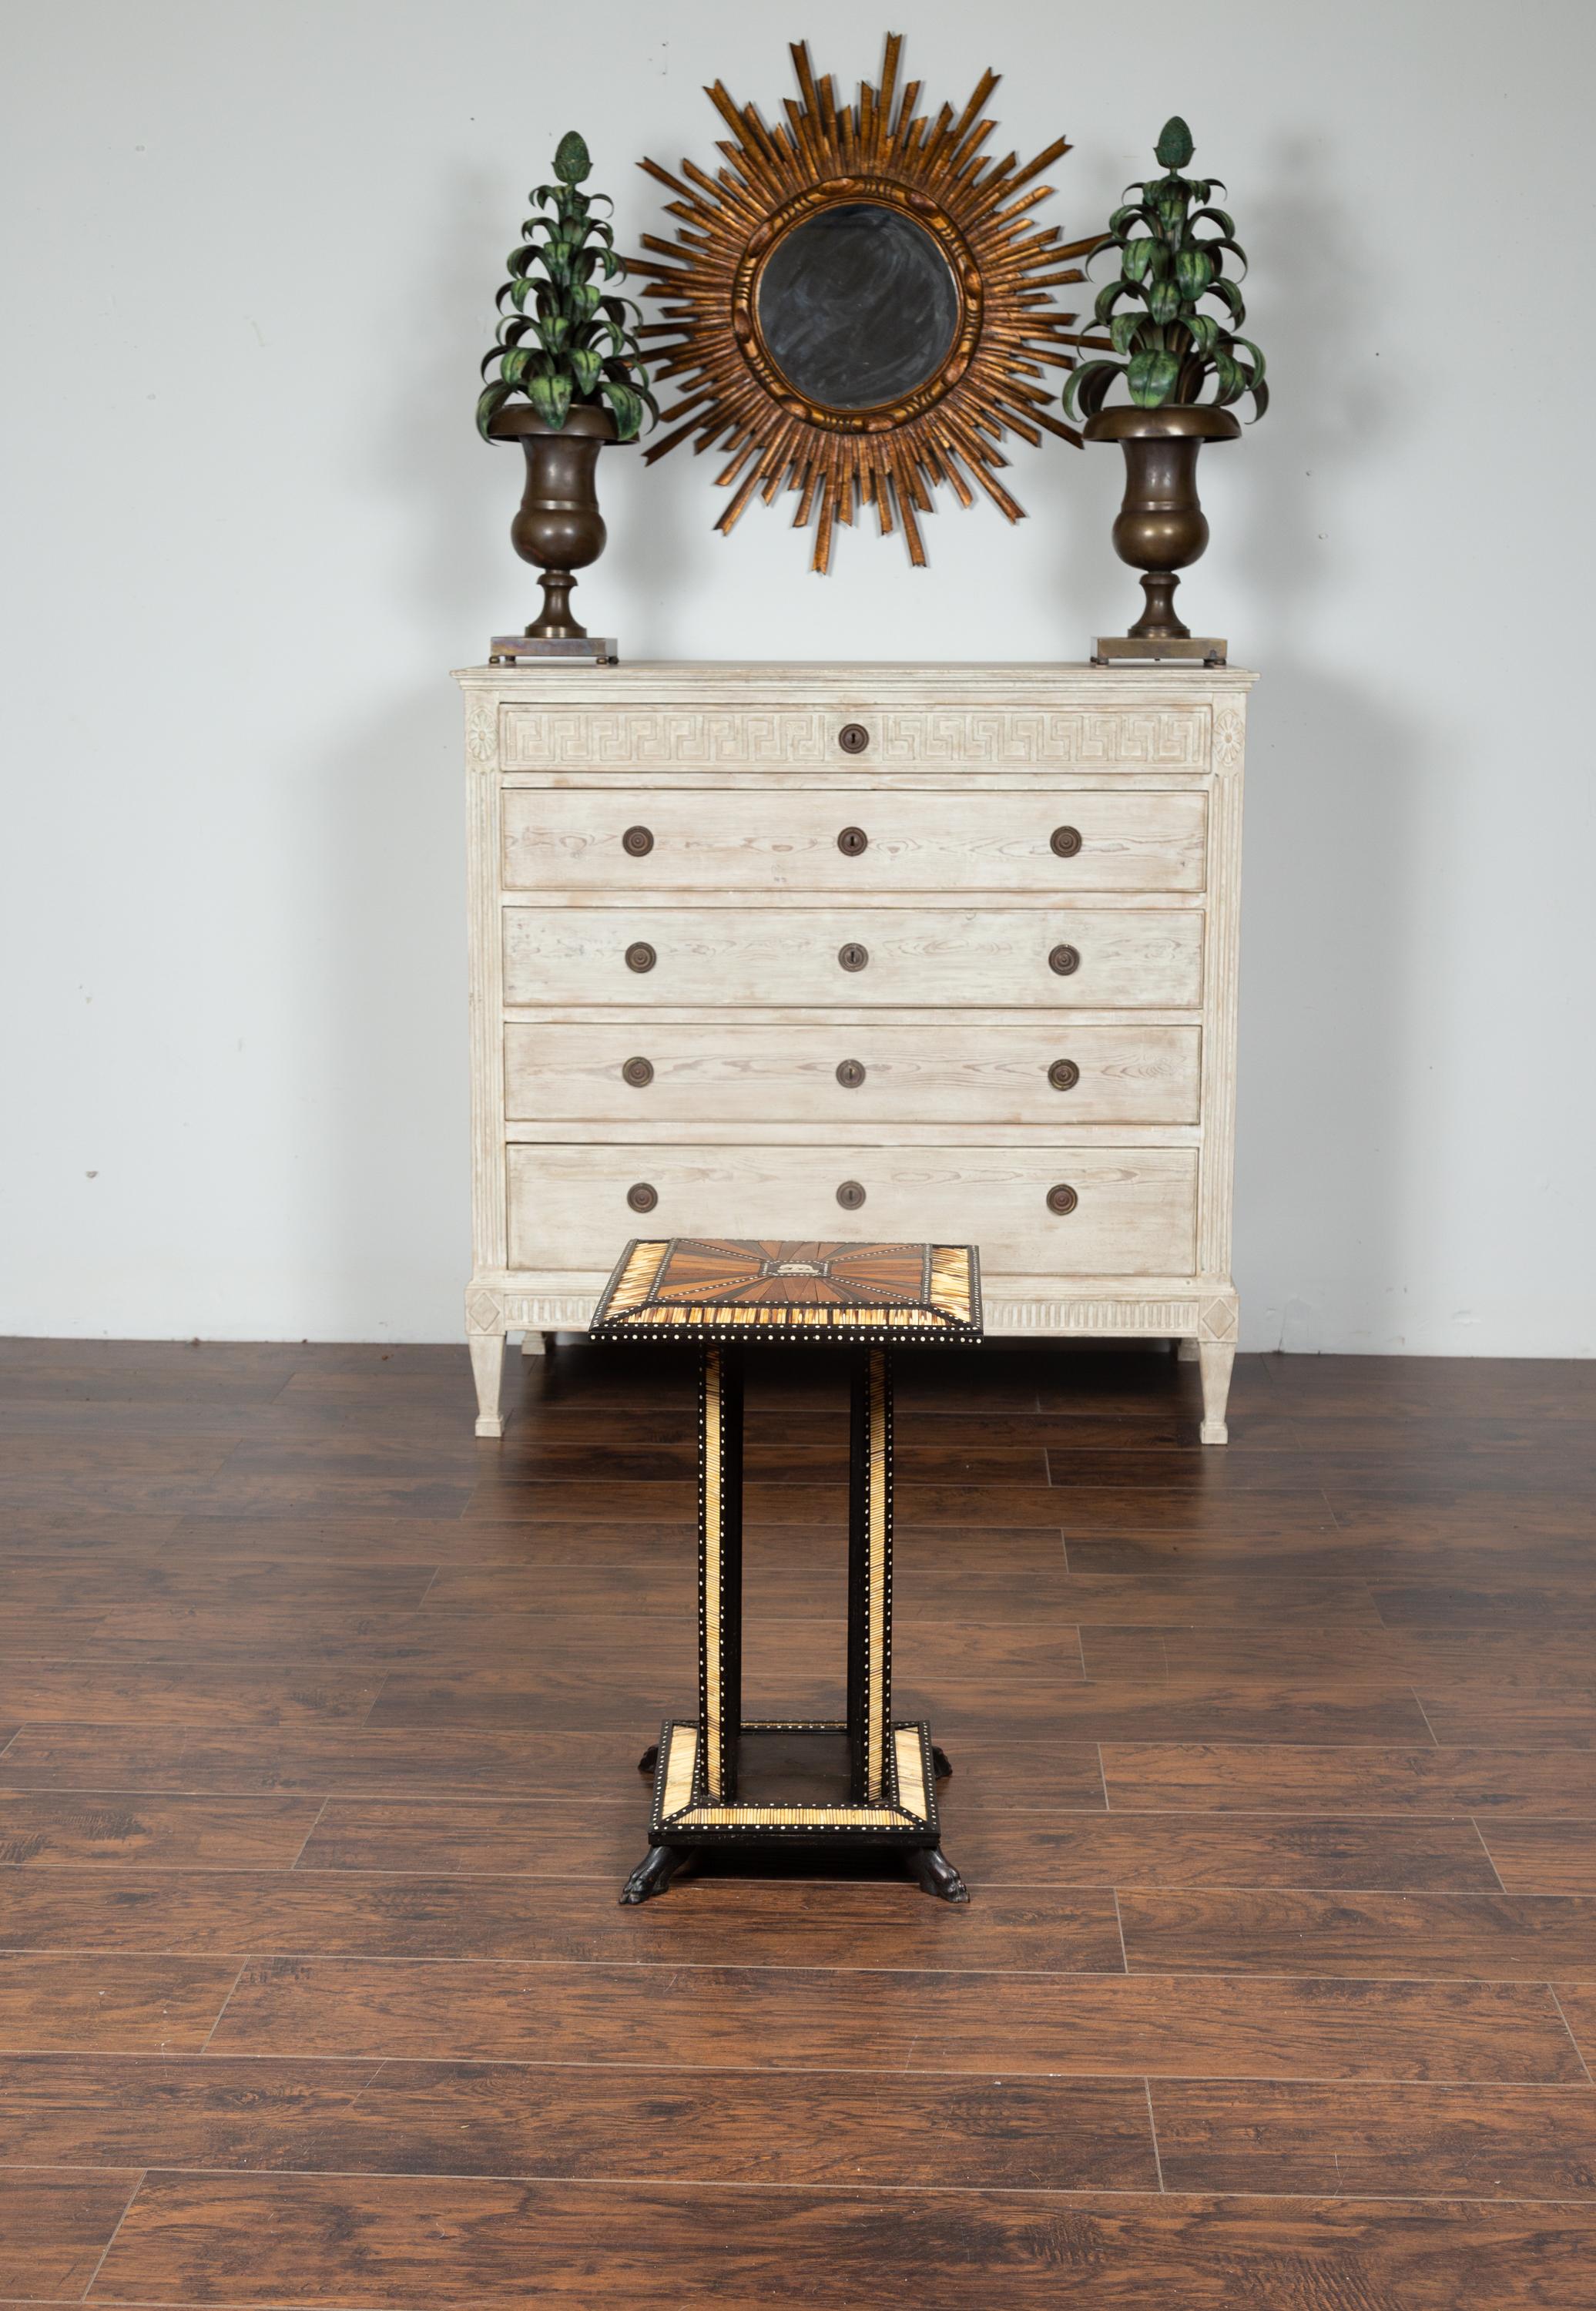 Indian Ebonized Side Table with Porcupine Quill Inlay and Elephant Motif, circa 1900